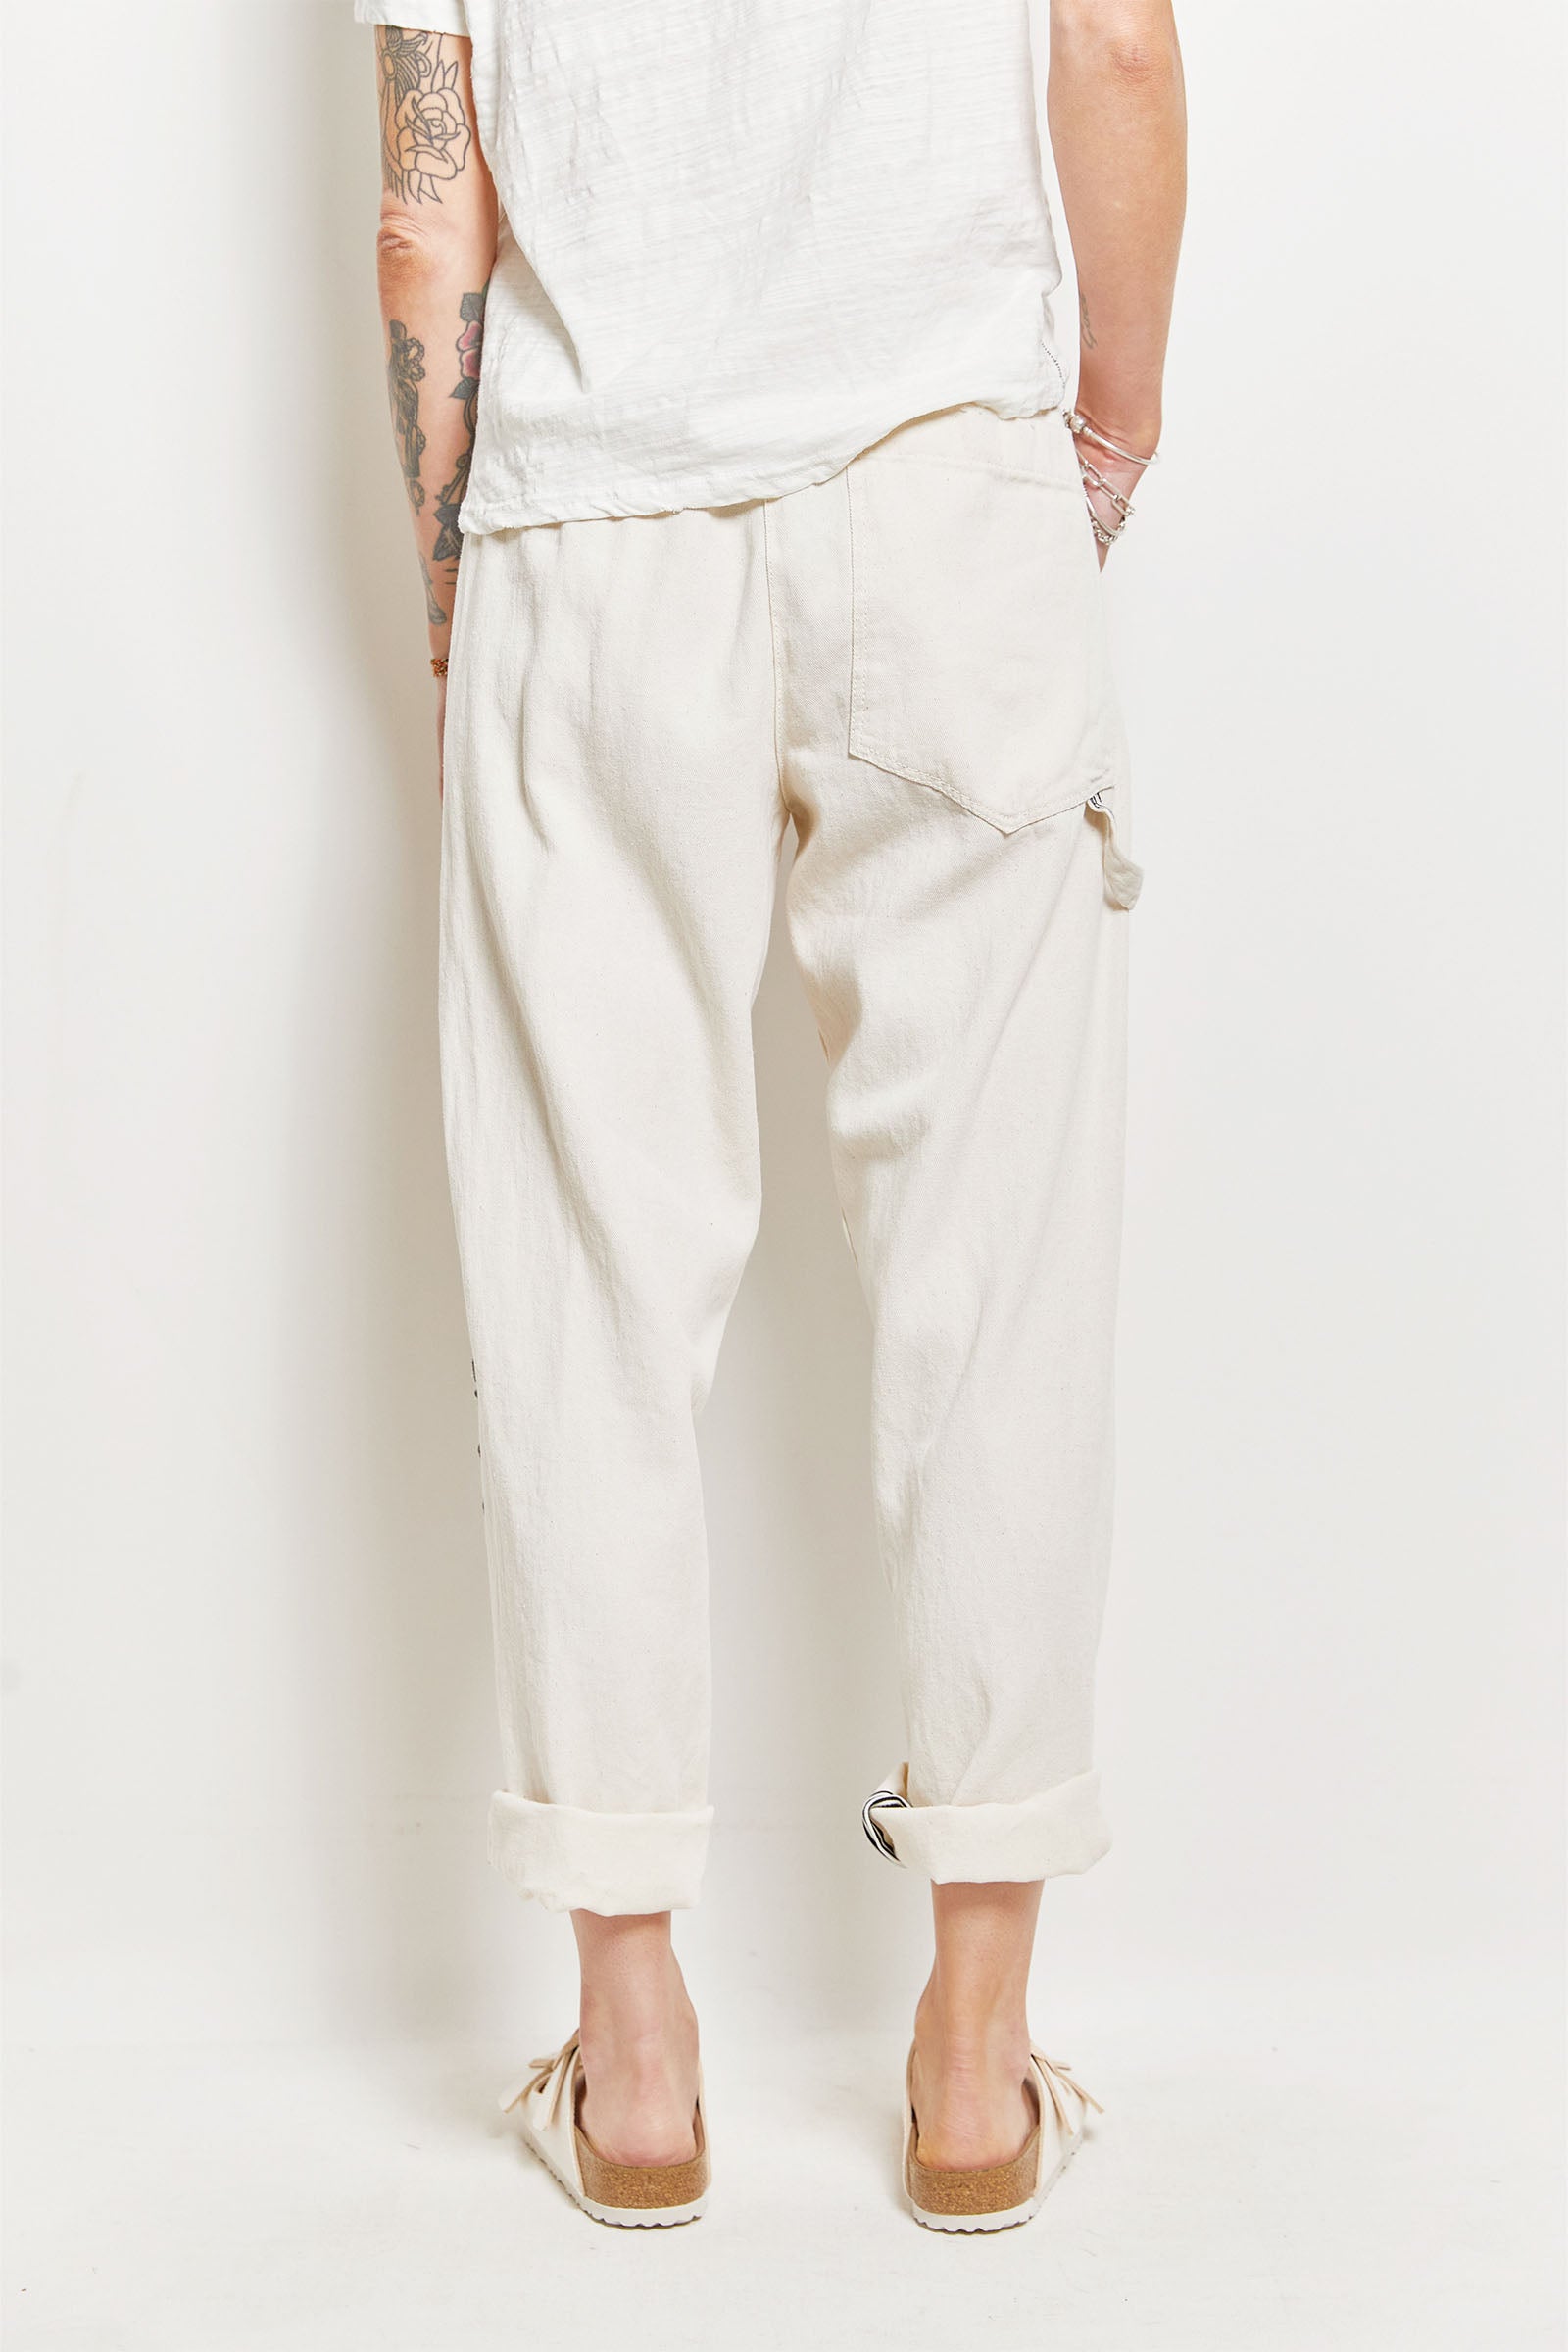 byfreer's dax cotton post waste canvas pants.